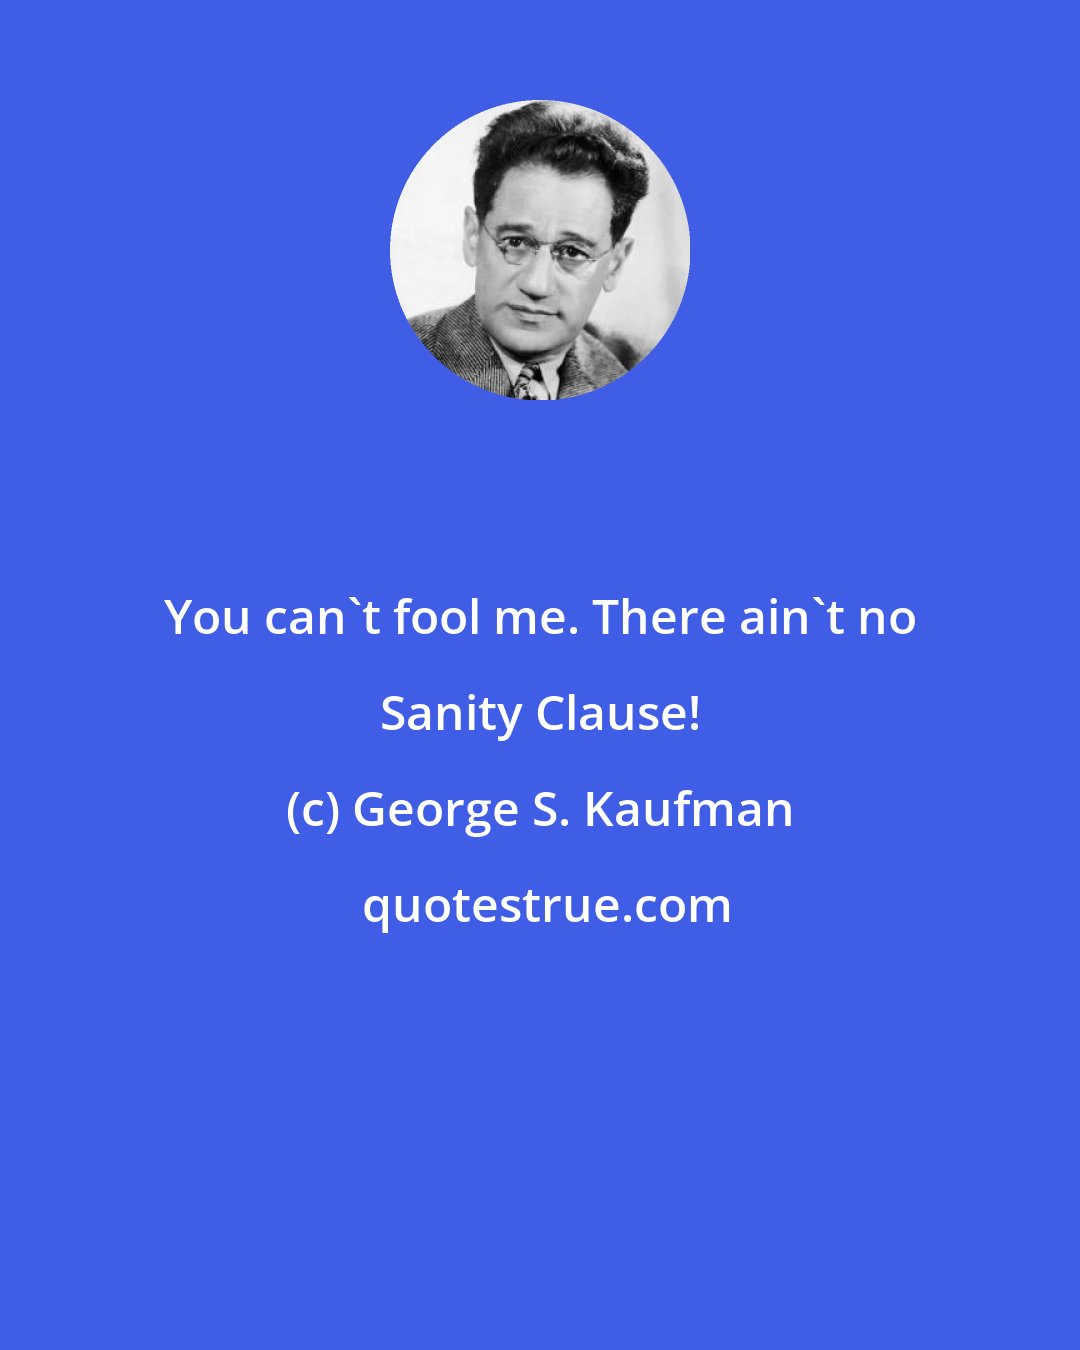 George S. Kaufman: You can't fool me. There ain't no Sanity Clause!